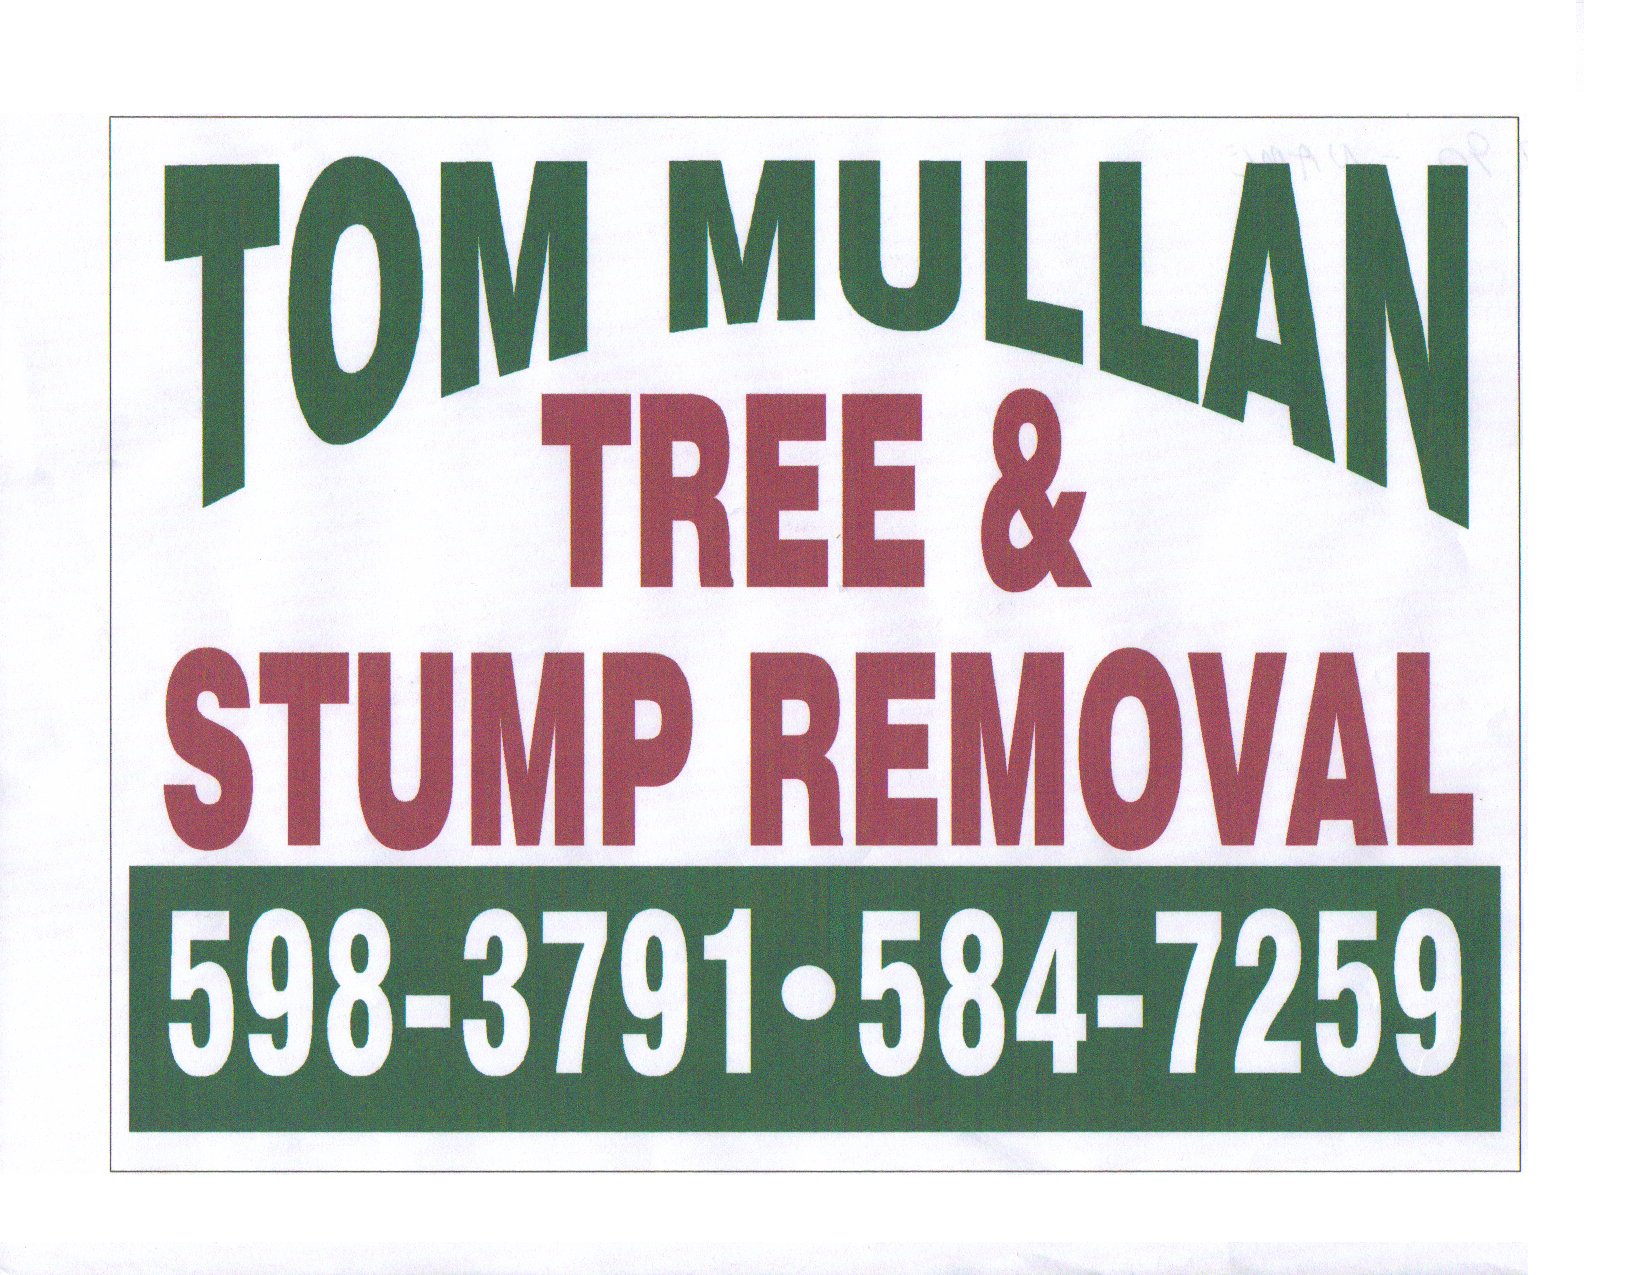 Tom Mullan Tree Service and Stump Removal